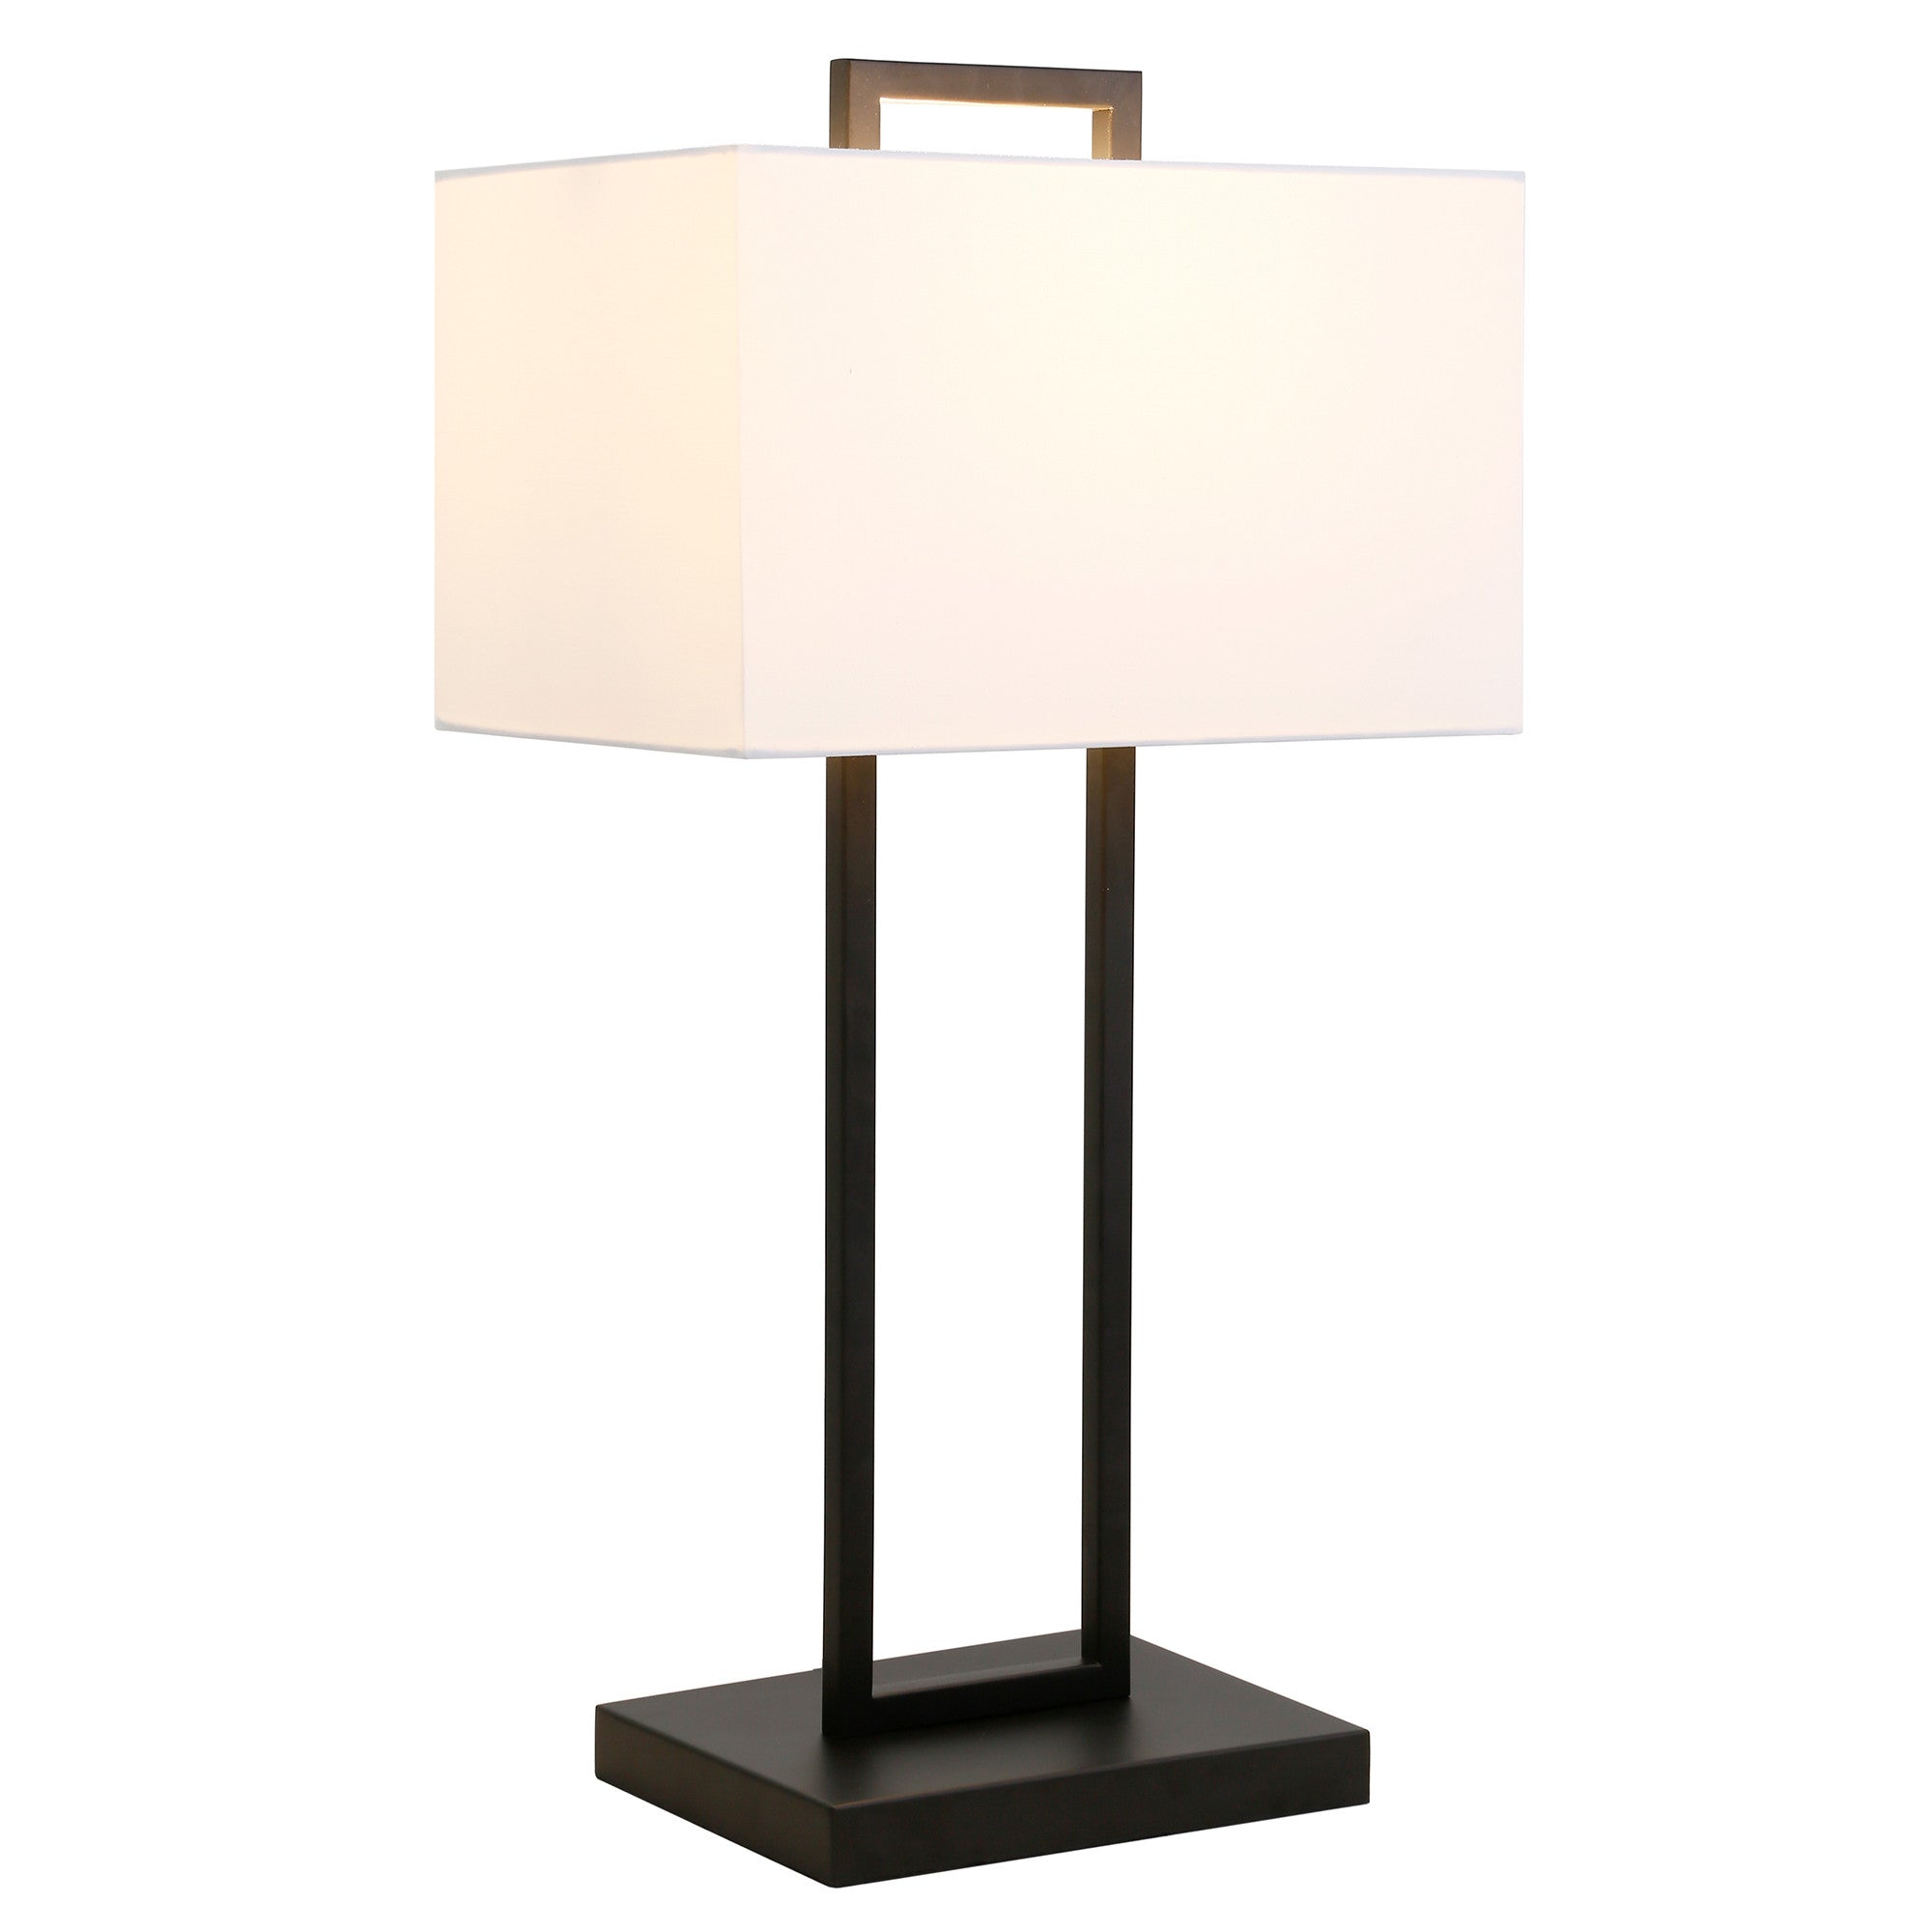 28" Black Metal Table Lamp With White Shade